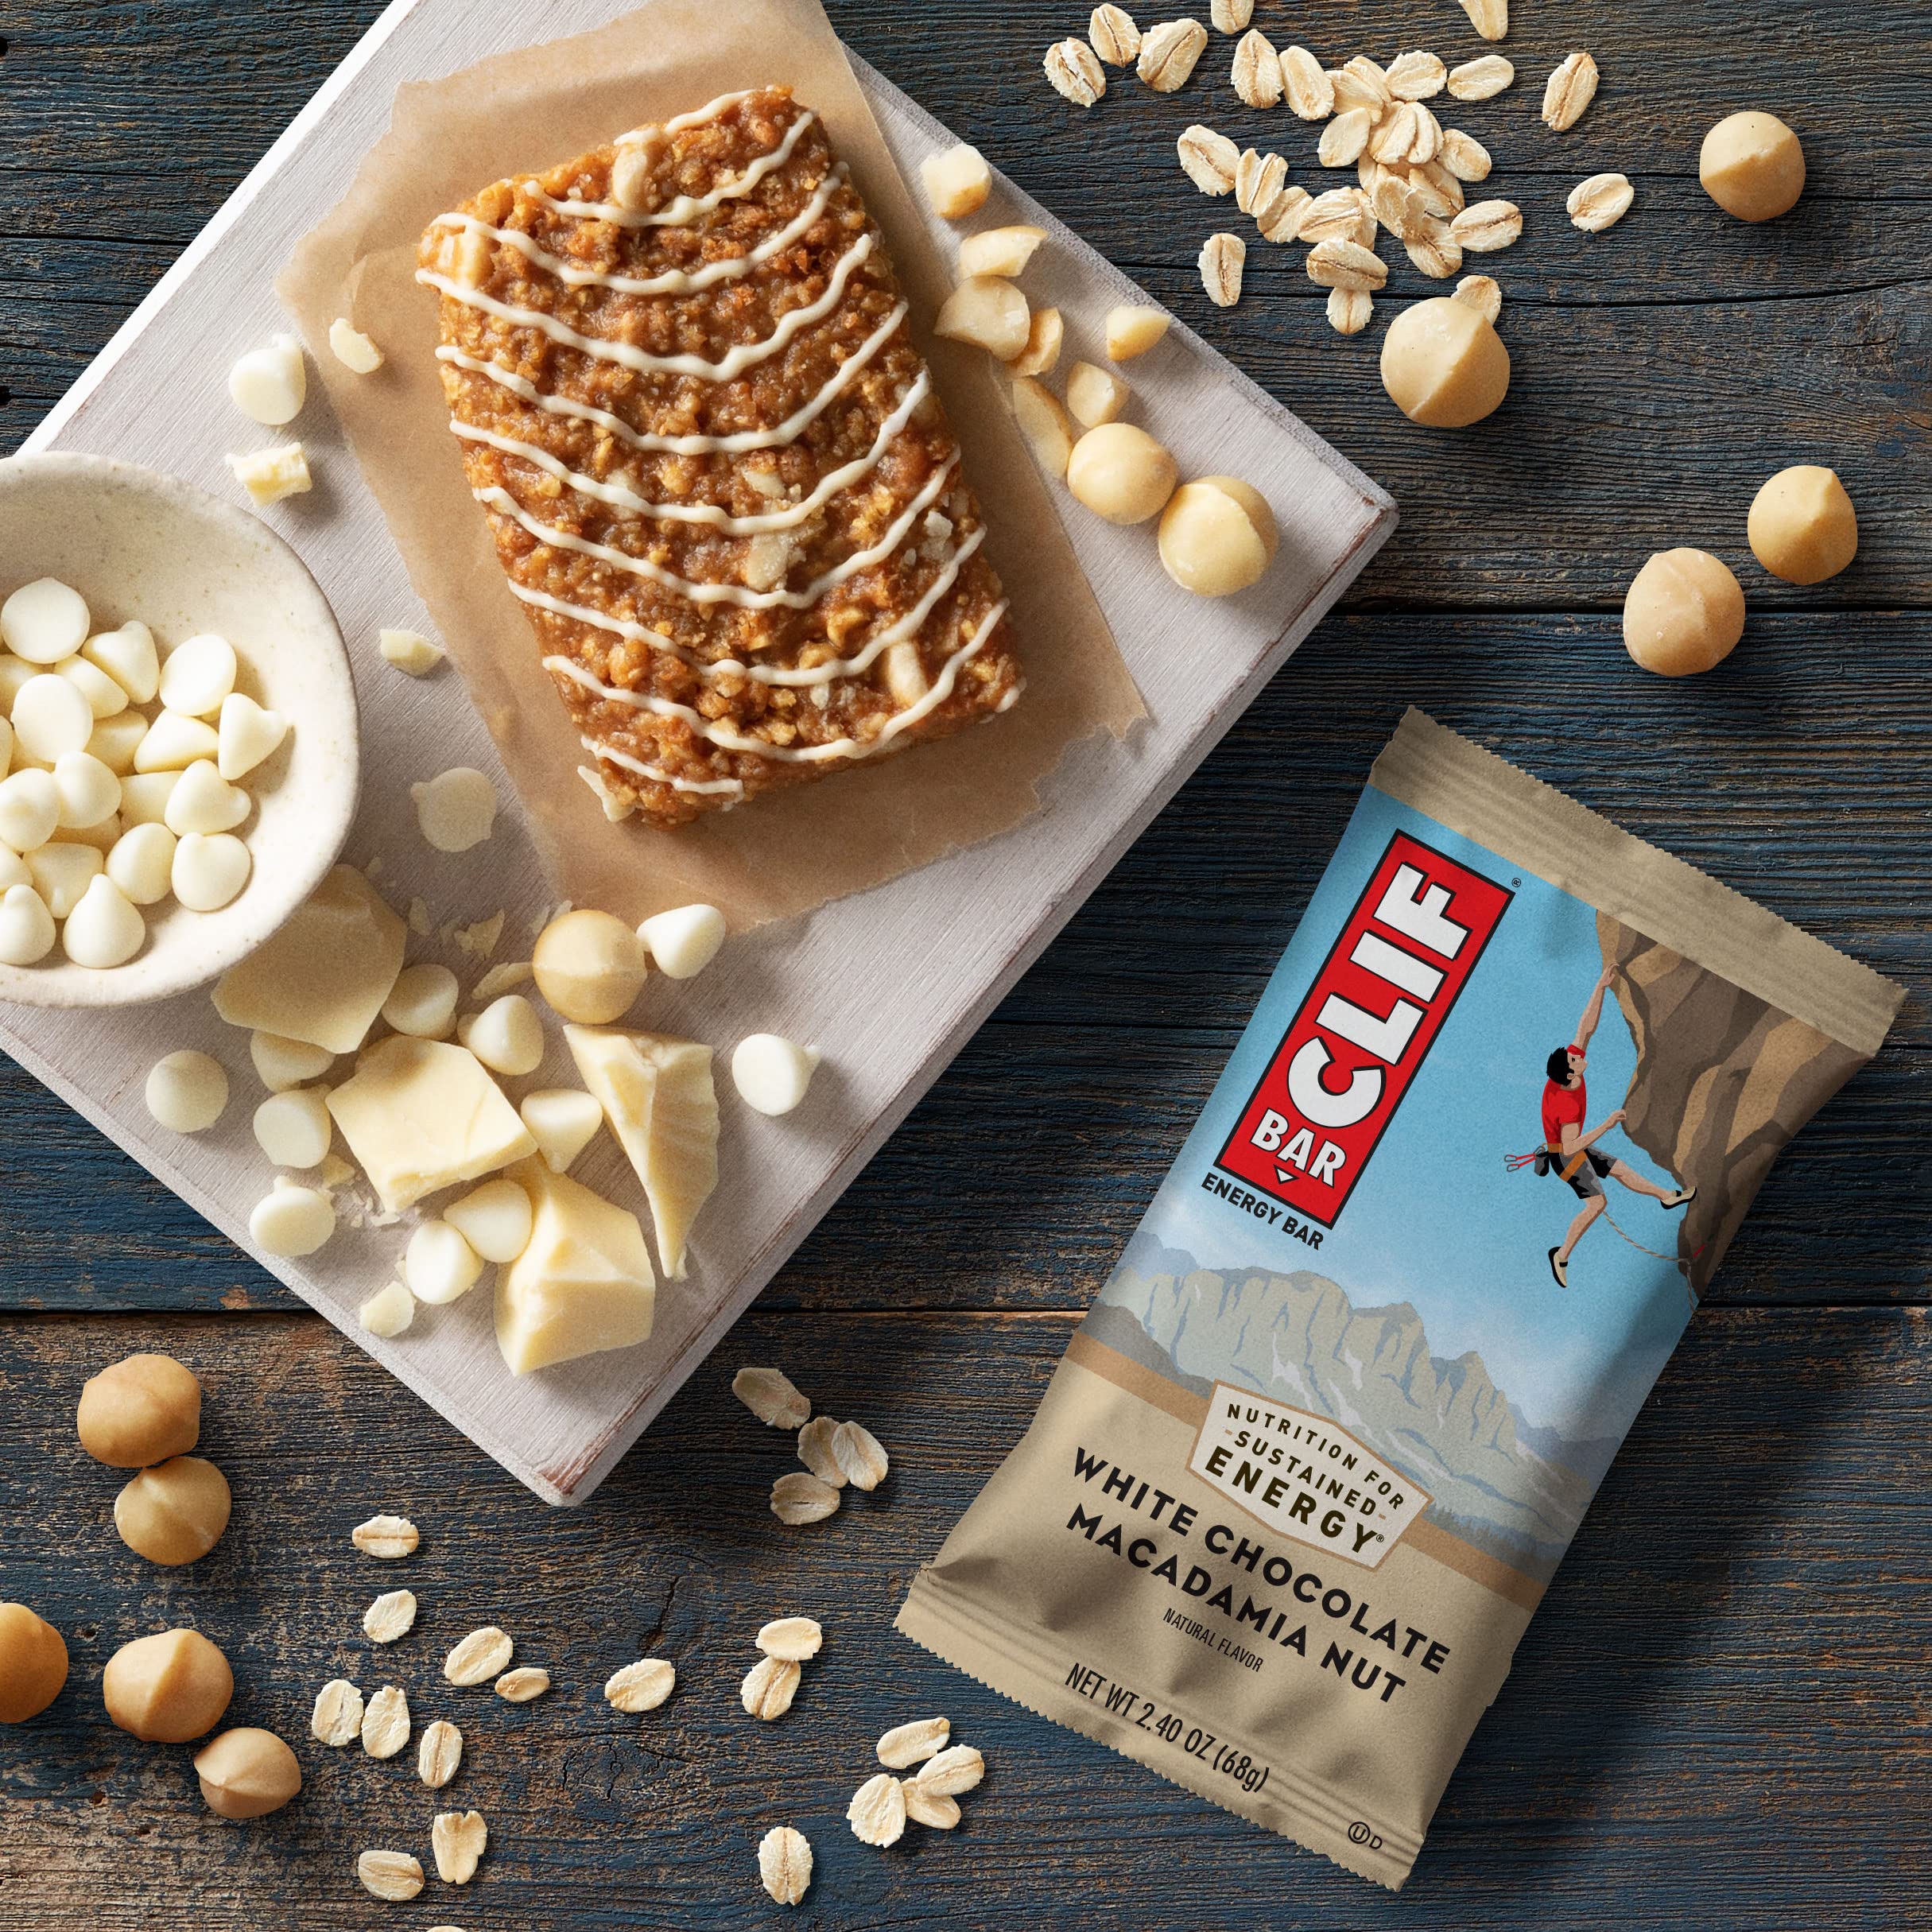 CLIF Bars - Energy Bars - Chocolate Brownie - 12 Count + CLIF Bars - Energy Bars - White Chocolate Macadamia - 12 Count